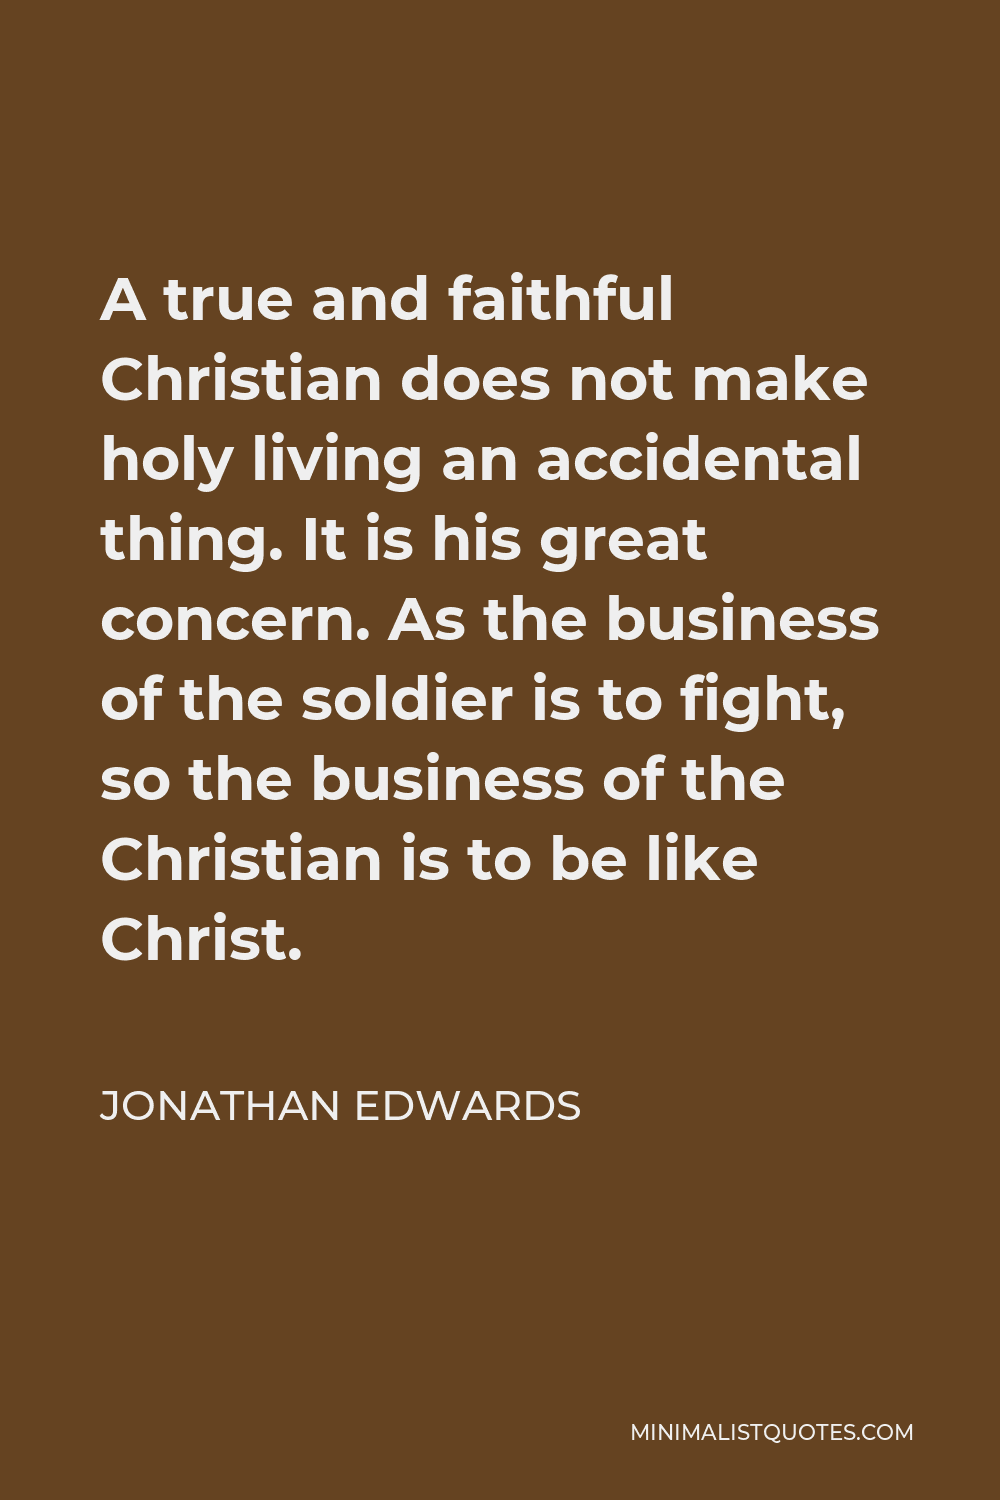 Jonathan Edwards Quote - A true and faithful Christian does not make holy living an accidental thing. It is his great concern. As the business of the soldier is to fight, so the business of the Christian is to be like Christ.